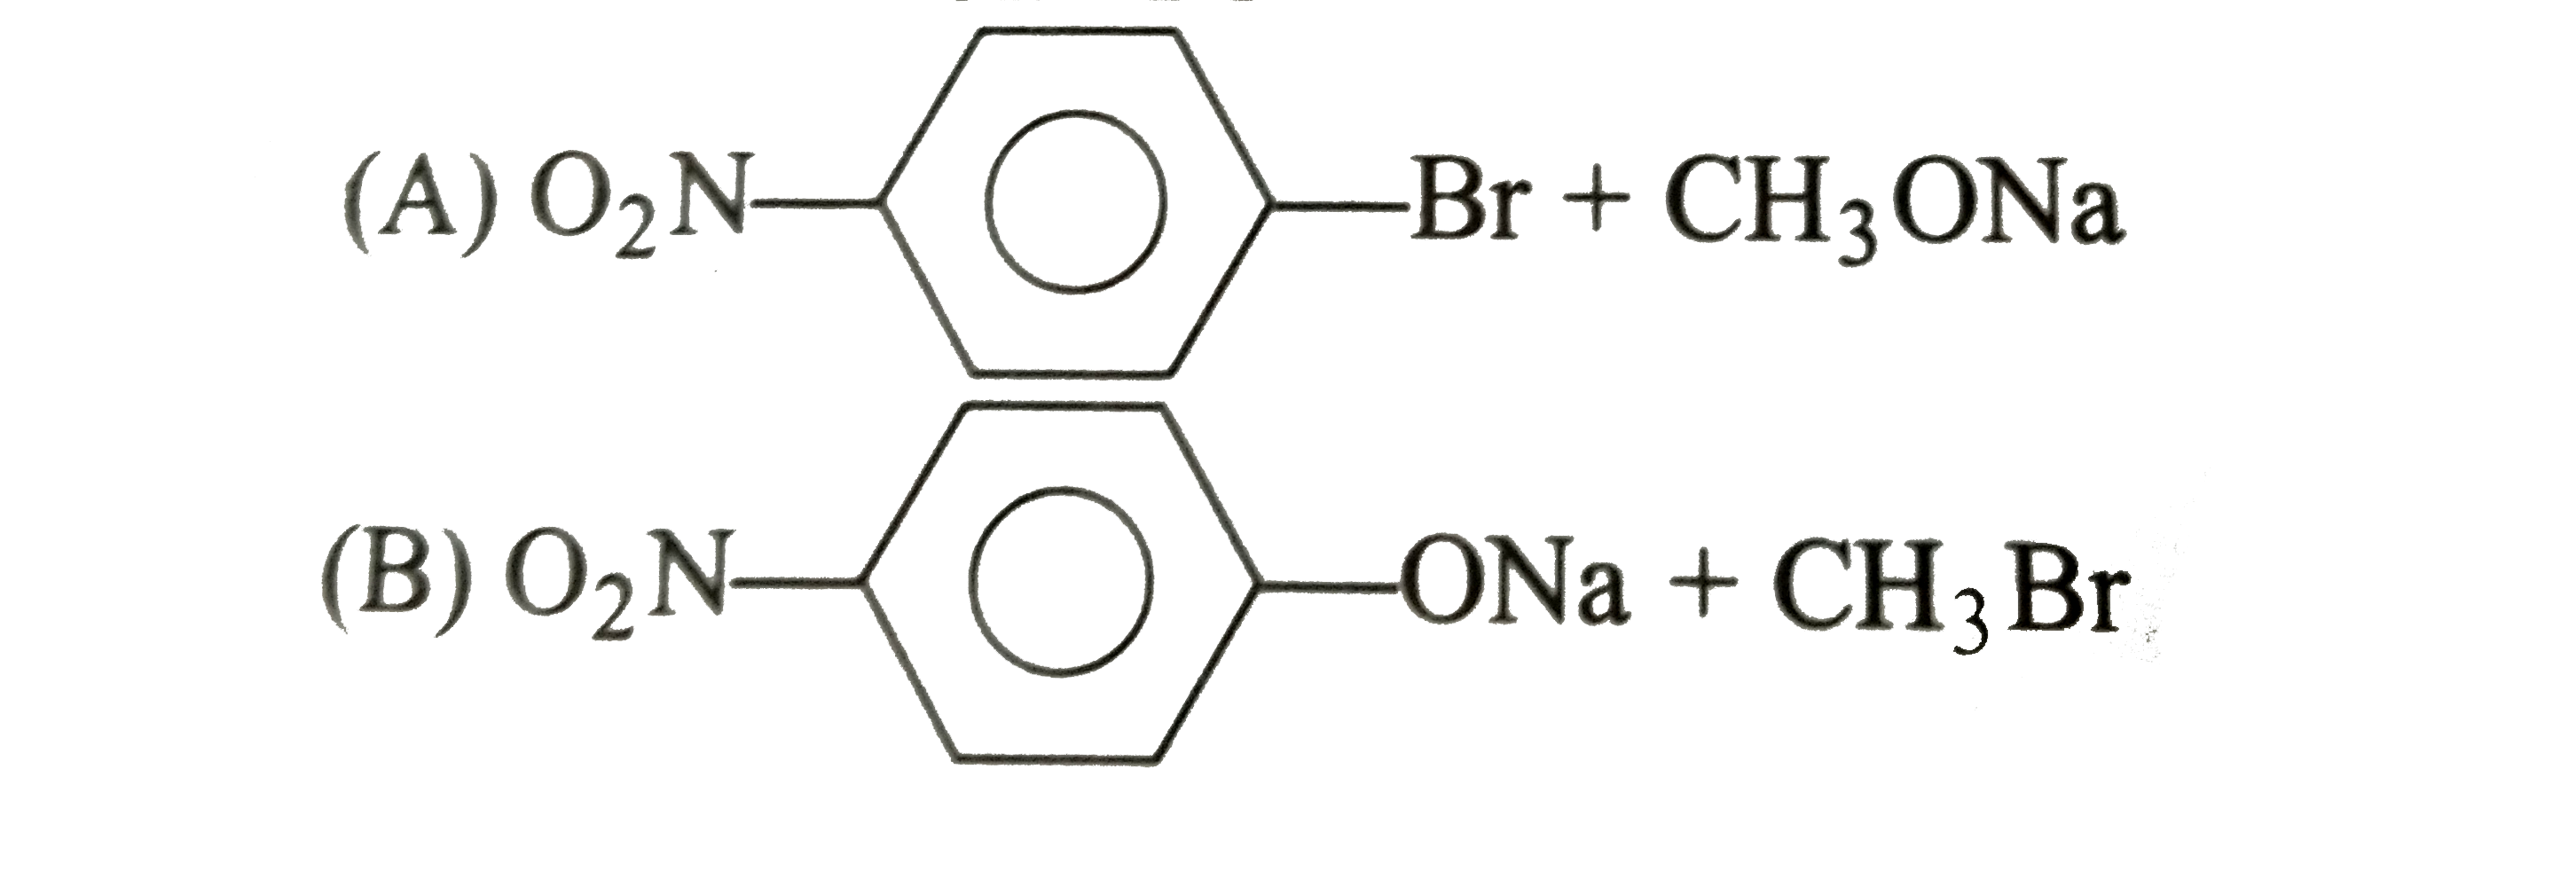 Which of the following is an appropriate set of reactants for the preparation of 1-methoxy -4-nitrobenzene ?